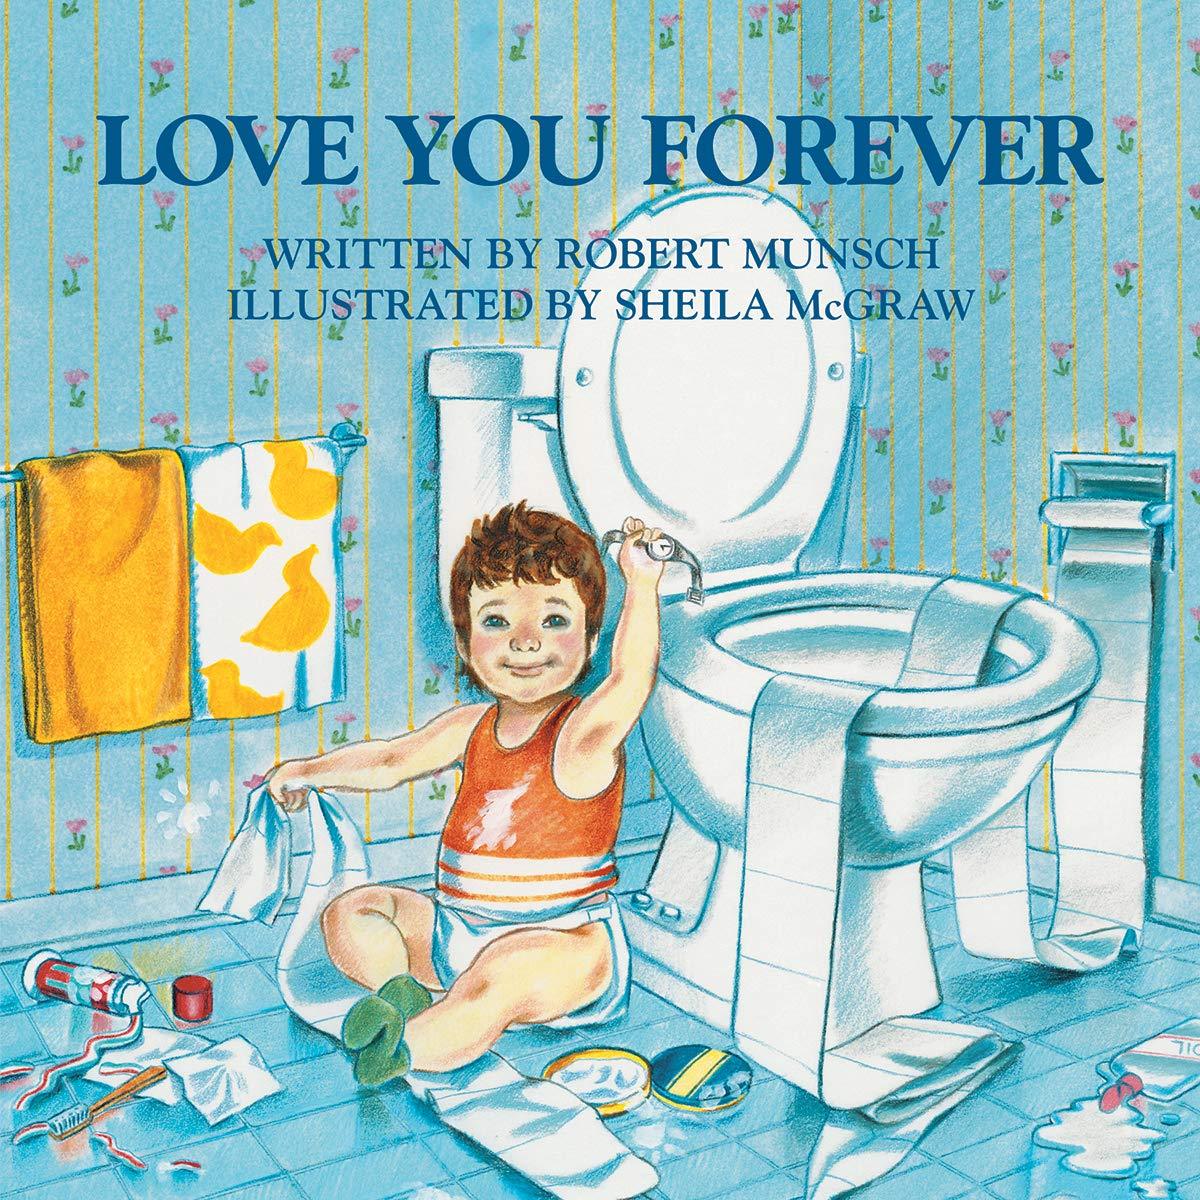 Love You Forever by Robert Munsch (Paperback) Children's Book - LV'S Global Media